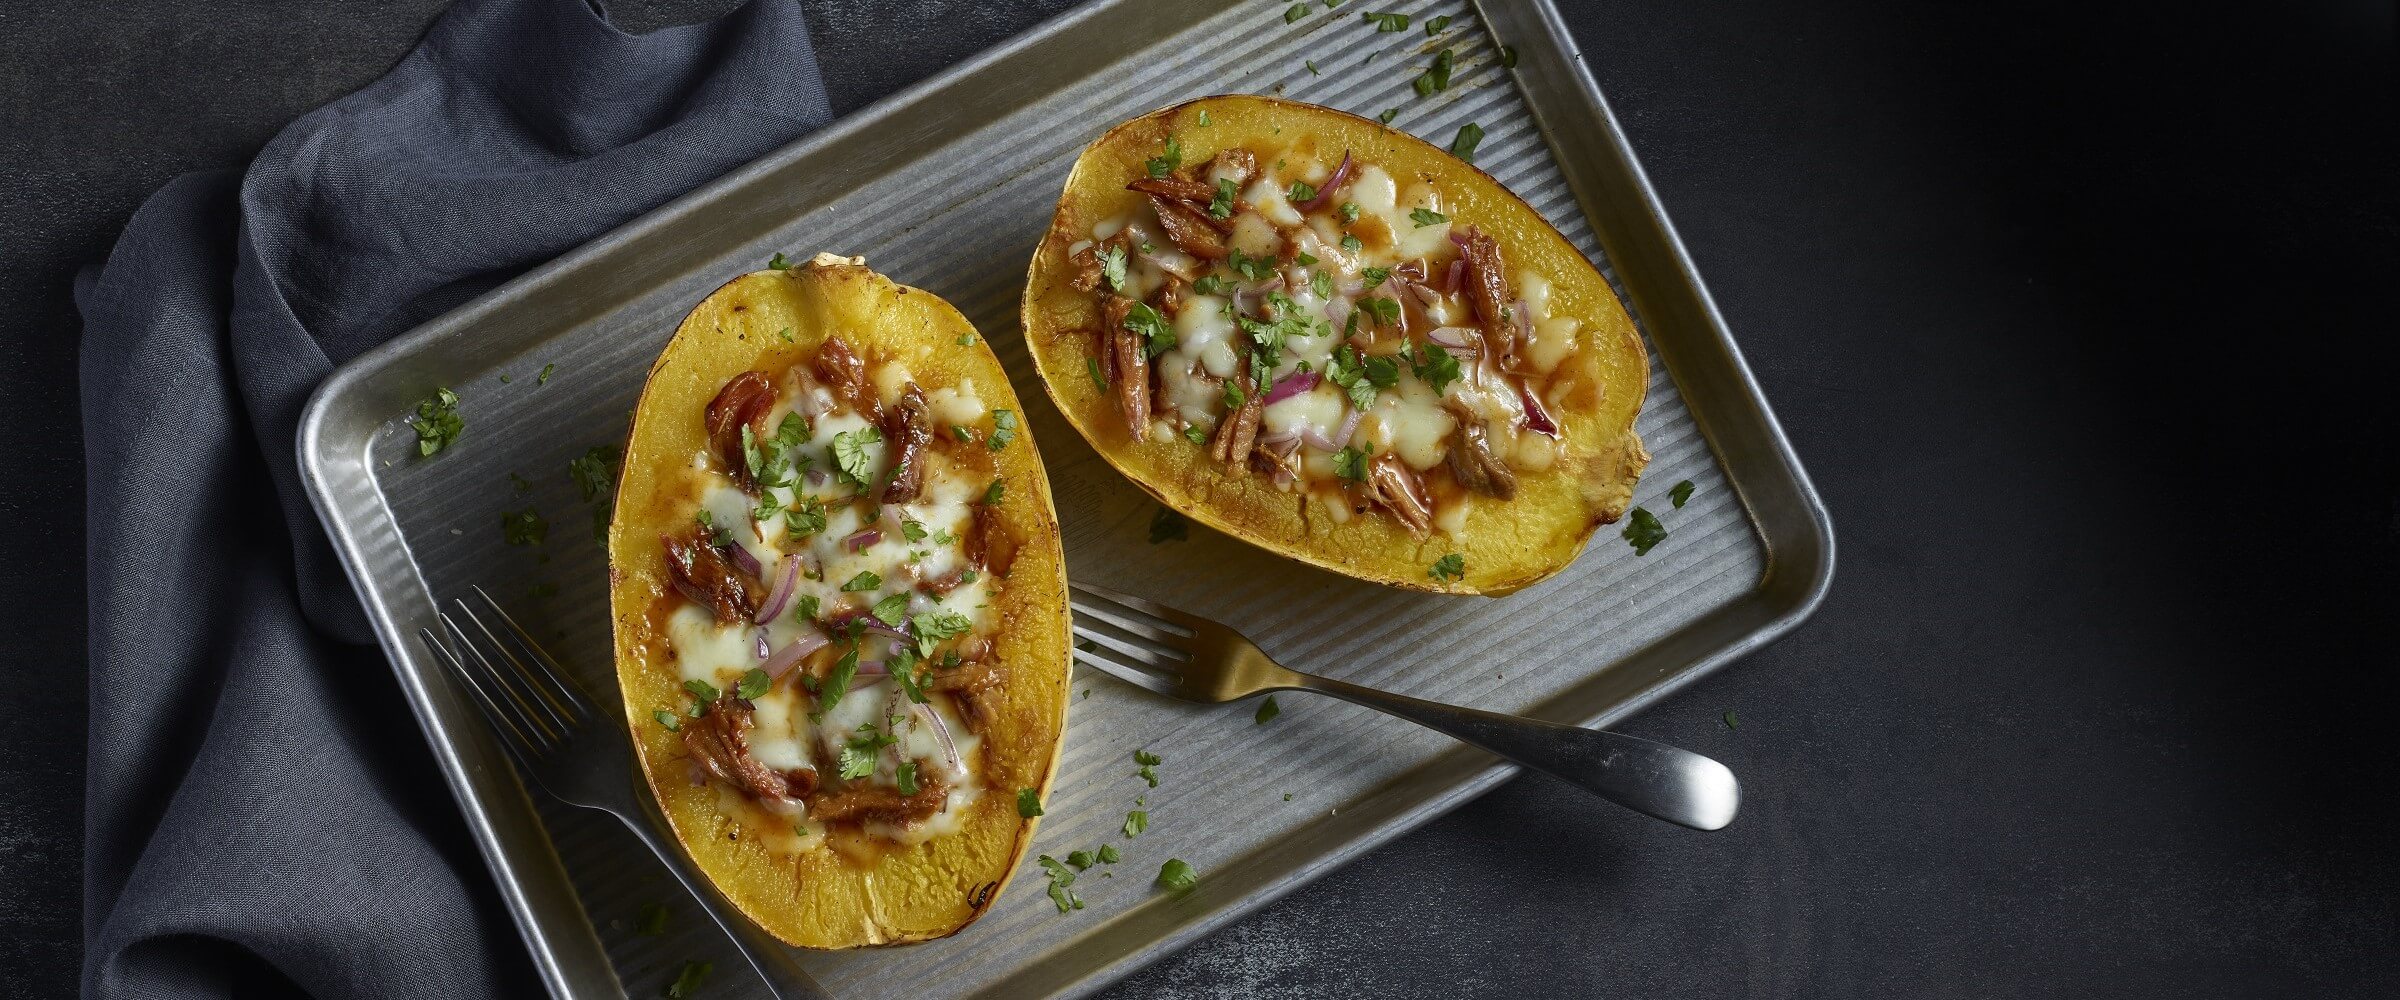 Pulled pork stuffed spaghetti squash topped with cheese on sheet pan with forks